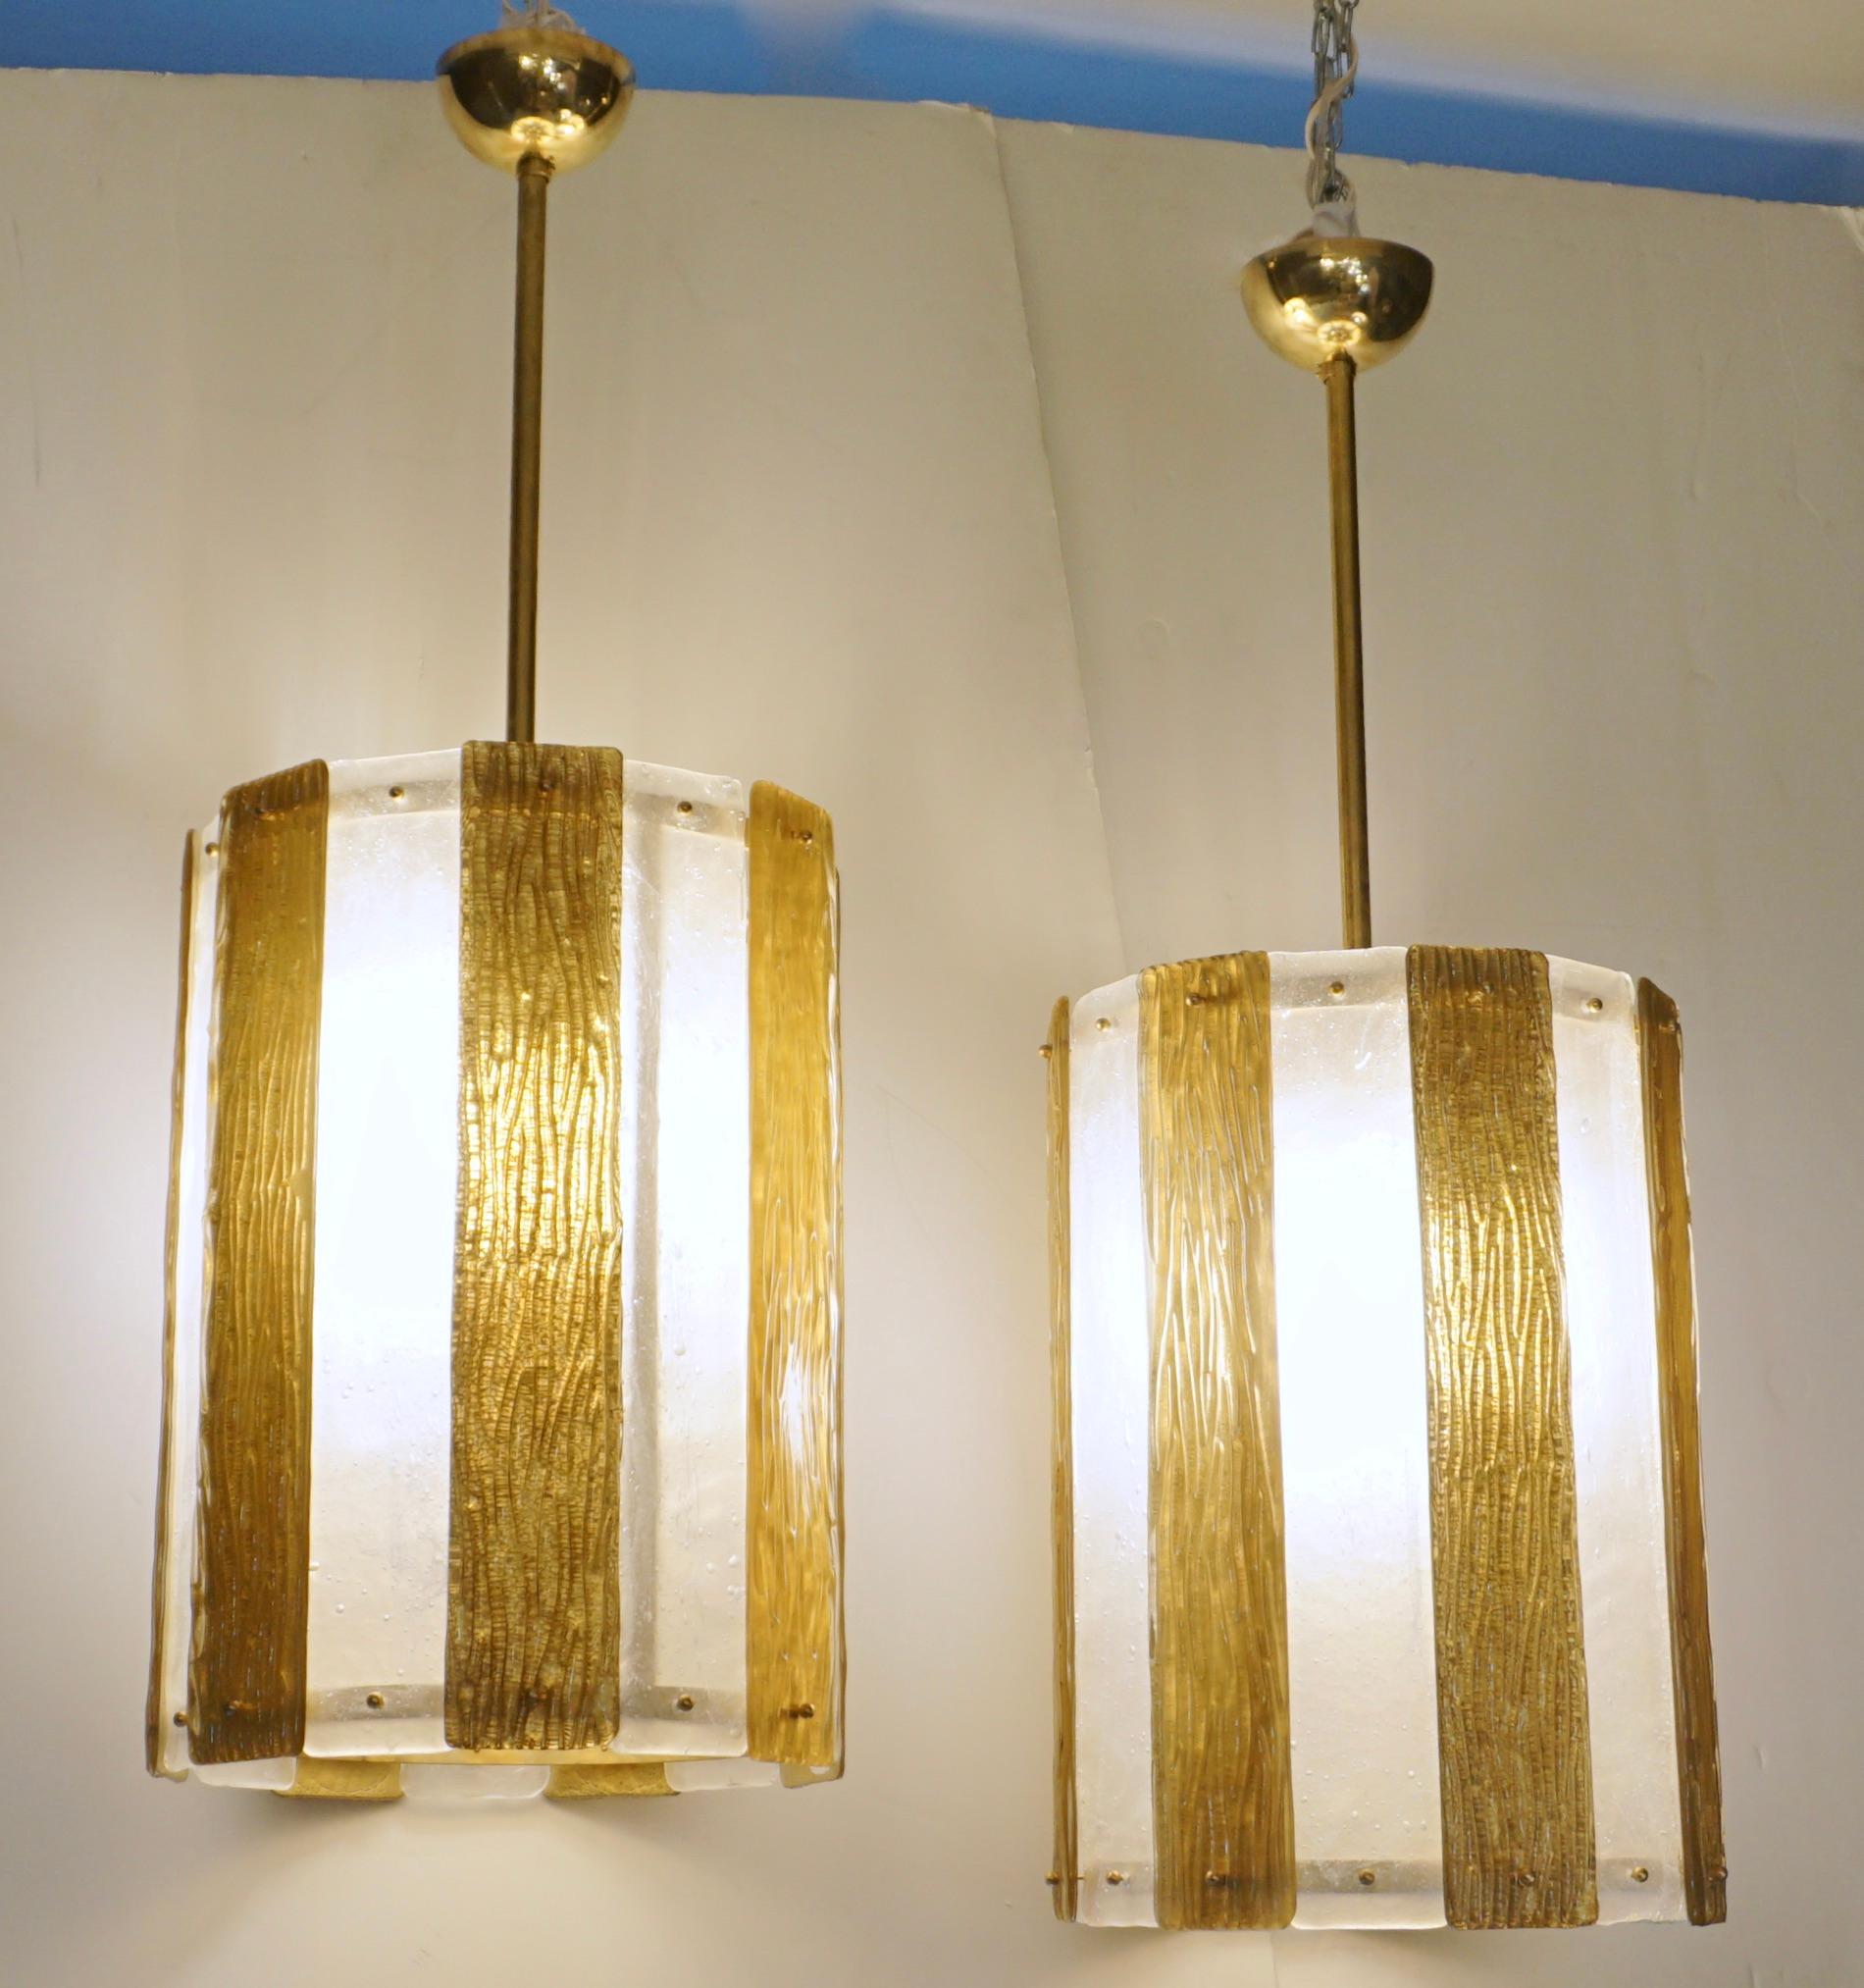 A pair is available - Unique contemporary Italian Art Deco design round pendant chandelier, entirely handcrafted. This light fixture is composed of a handmade brass structure supporting alternating textured Murano glass bands, the frosted crystal